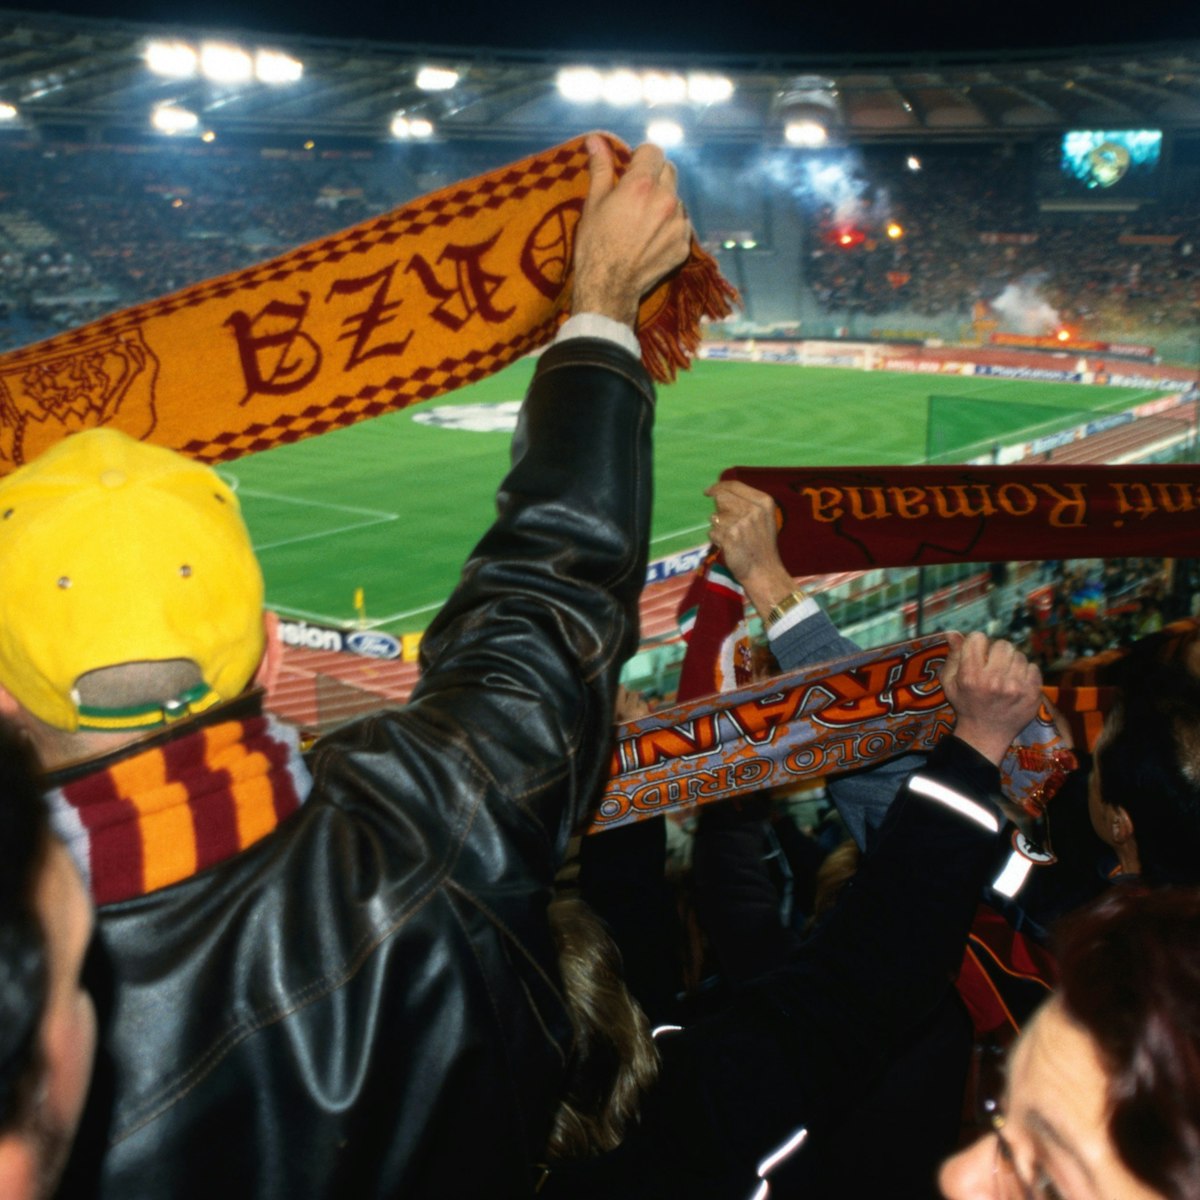 Soccer fans waving scarves at AS Roma versus Ajax Amsterdam match at Champions League Game Stadio Olimpico.